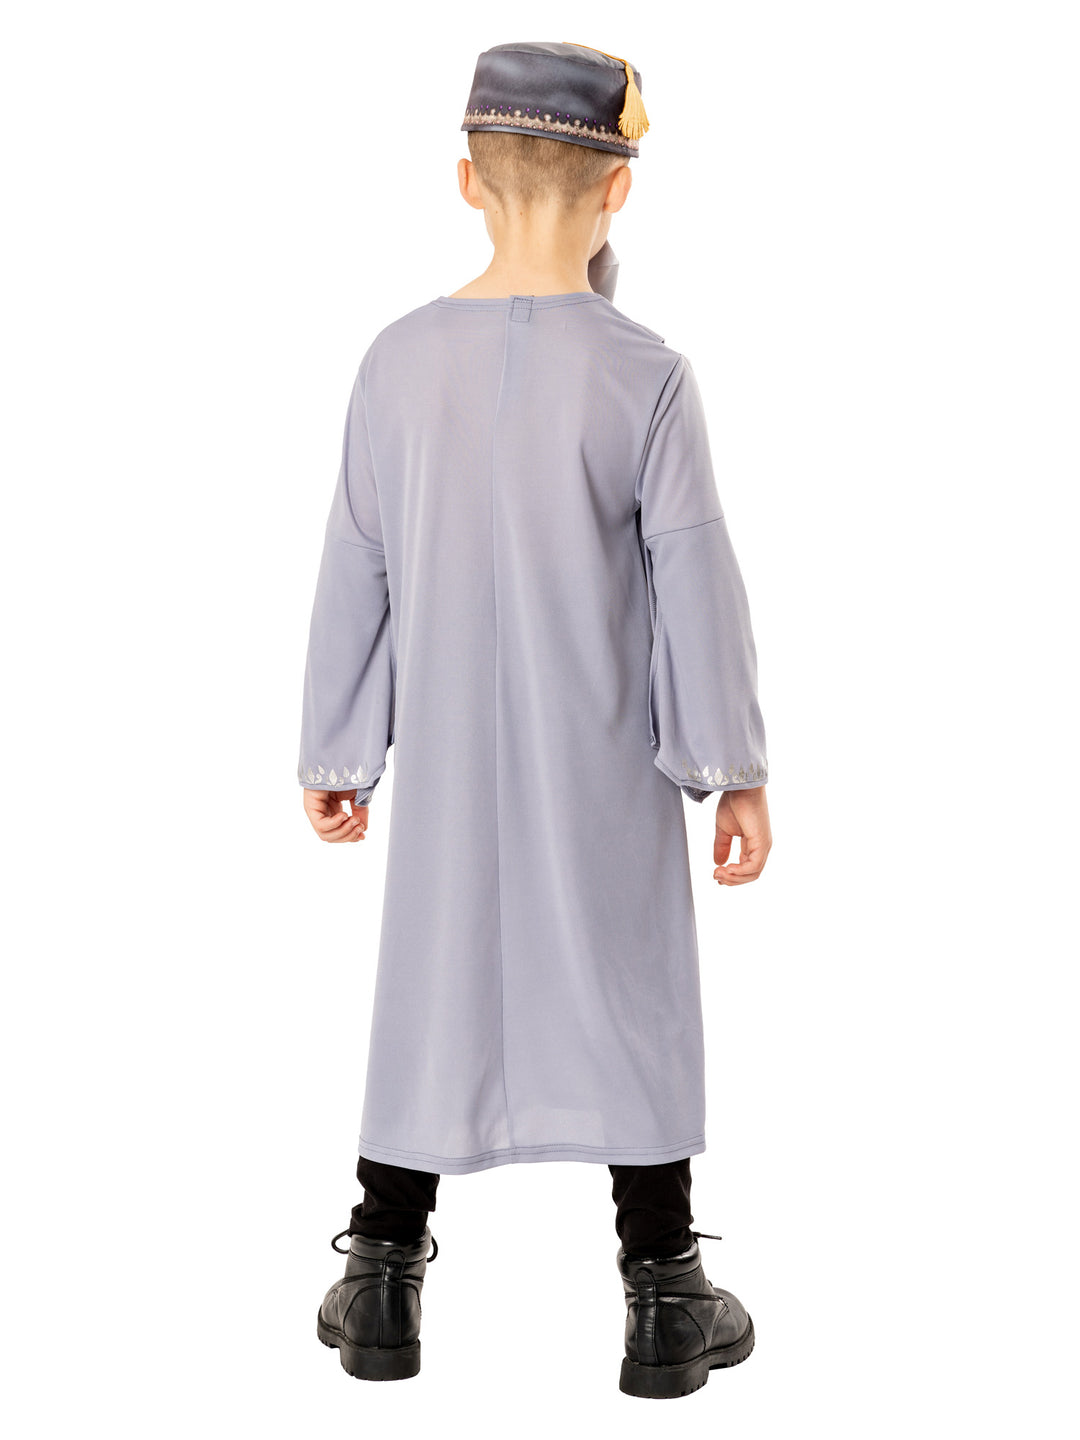 Boys Dumbledore Harry Potter Robe World Book Day Character Costume